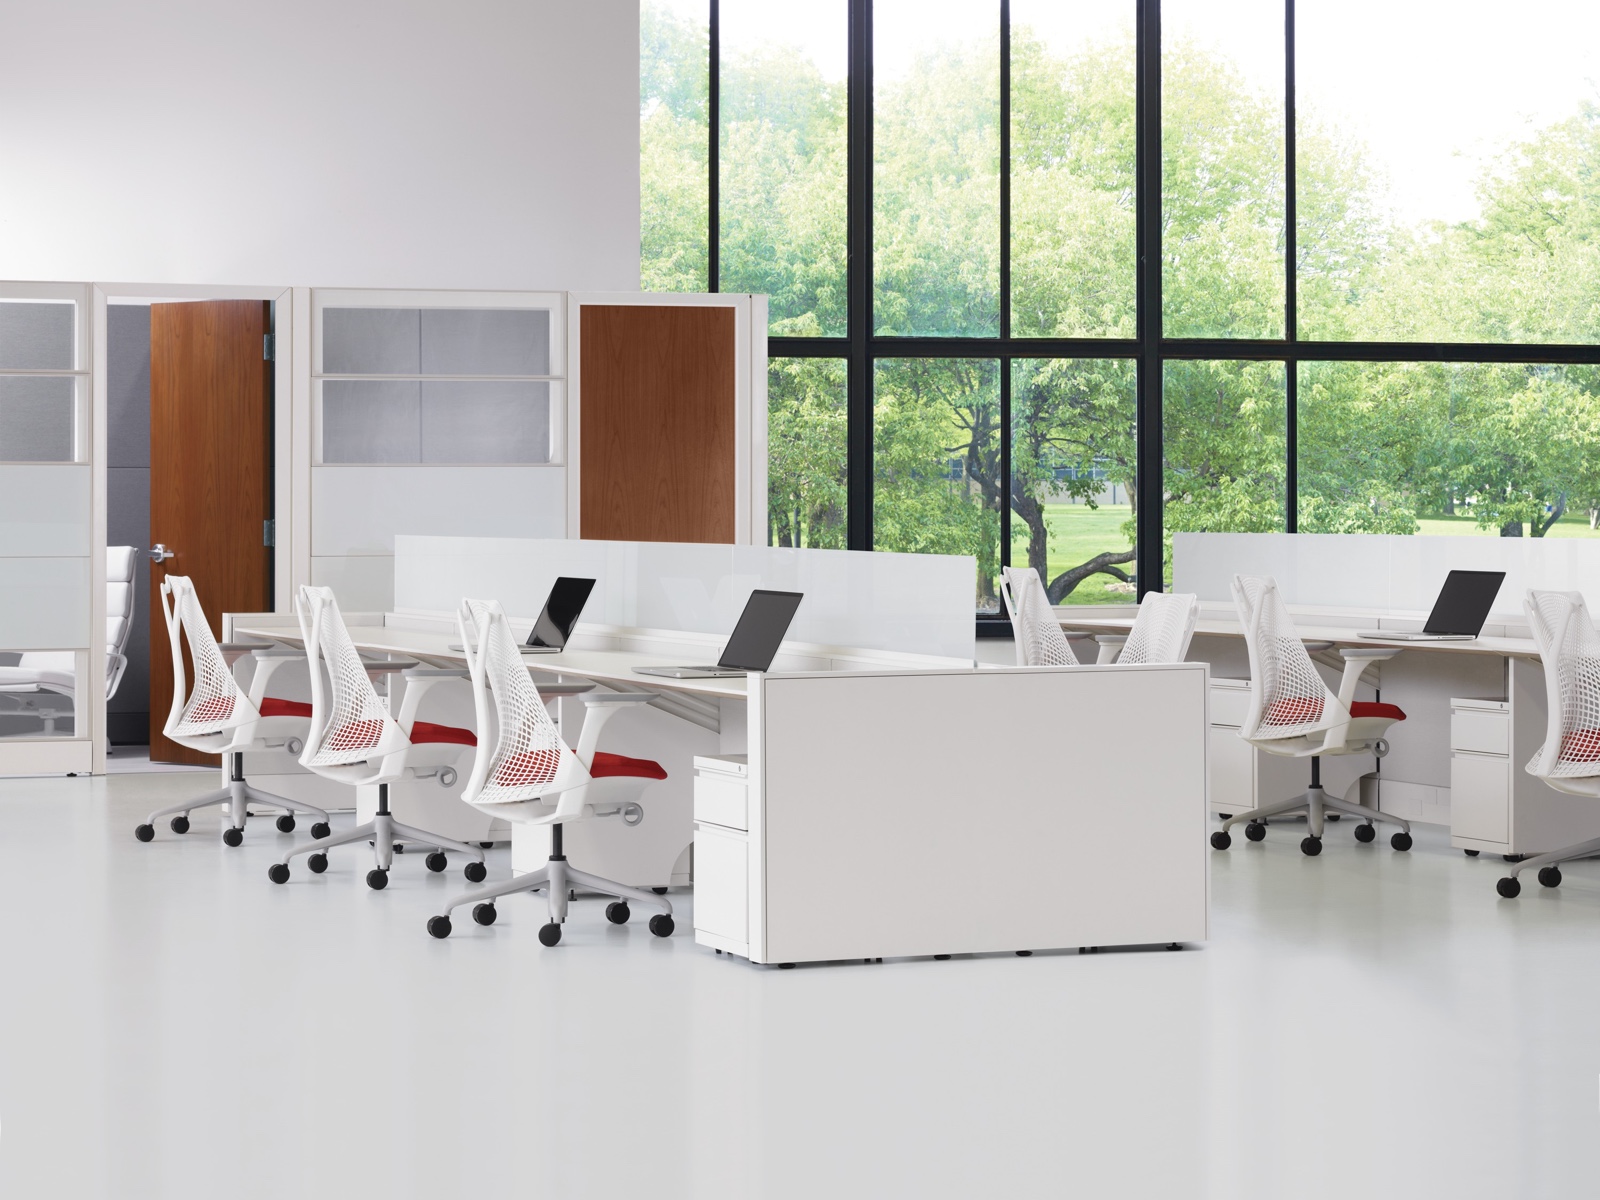 A mostly white workplace featuring two rows of the Ethospace System in a benching configuration, Tu storage pedestals, and Sayl office chairs.